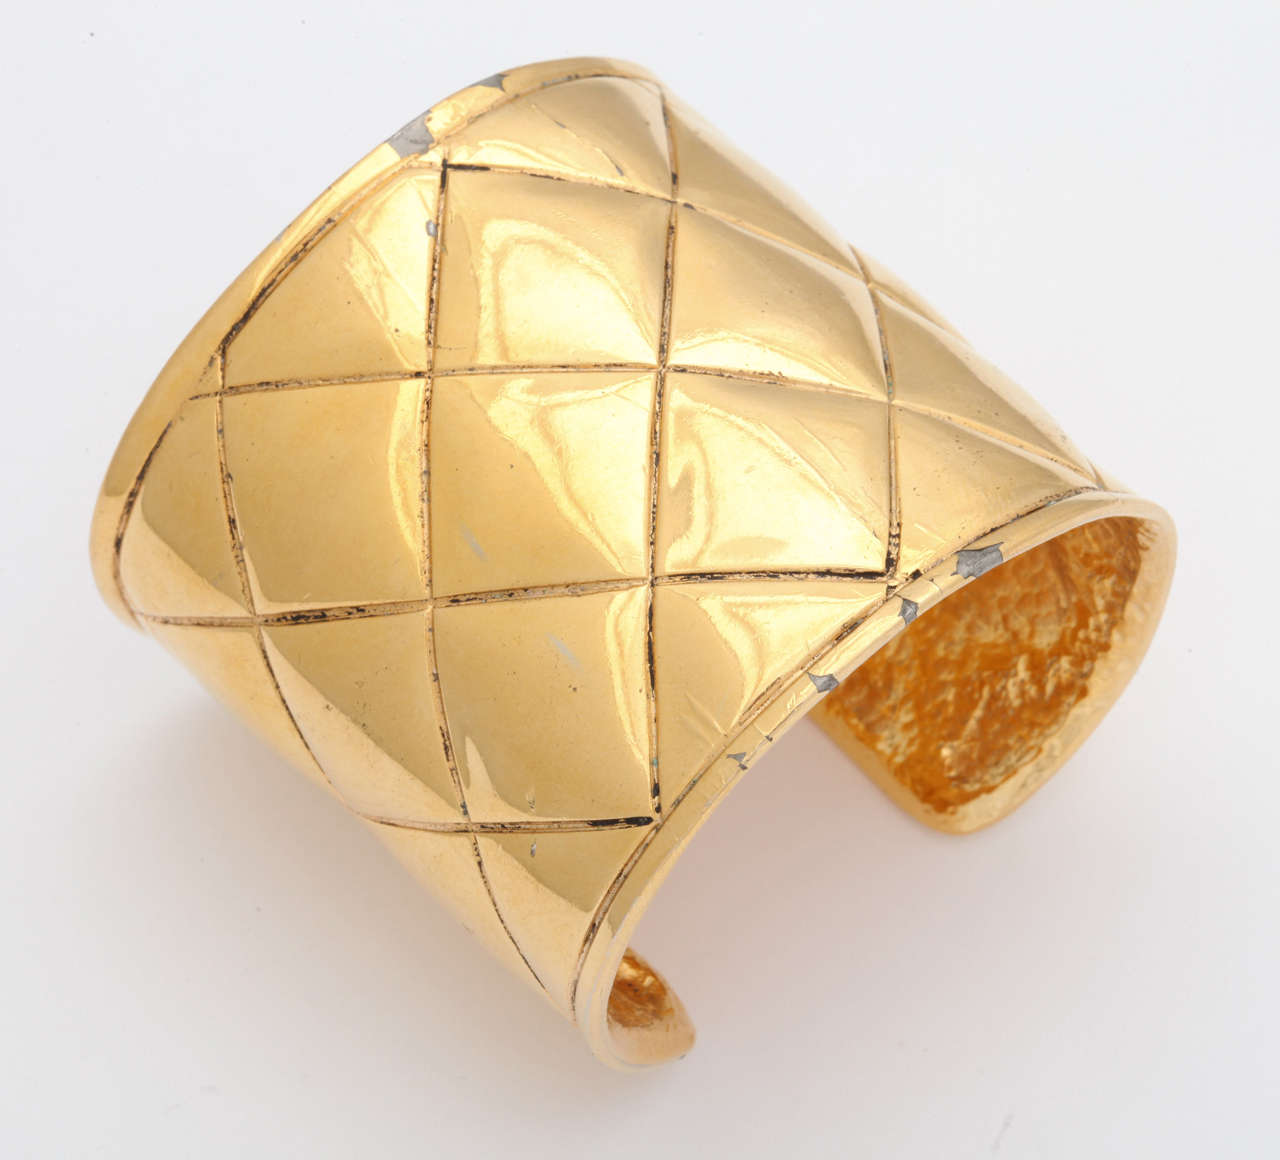 Chanel gold tone bangle bracelet with quilted details, it has a small CC logo on the side.
Signed Chanel made in France.